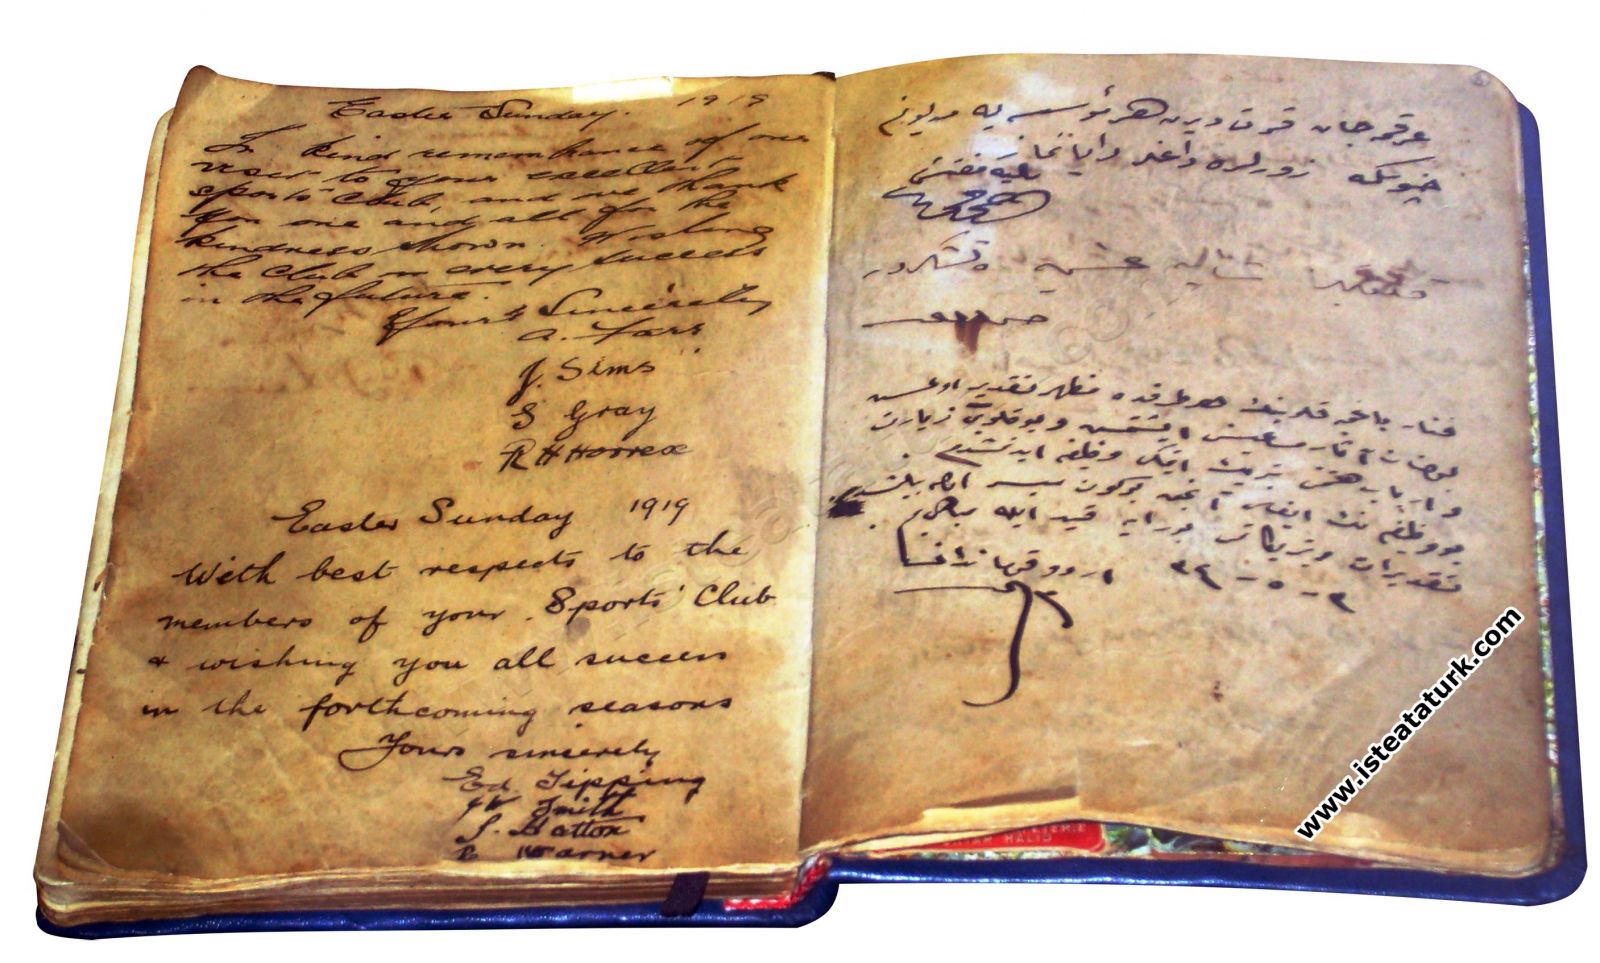 The note that Mustafa Kemal Pasha wrote in the honor book during his visit to Fenerbahçe Sports Club.  (May 3, 1918)